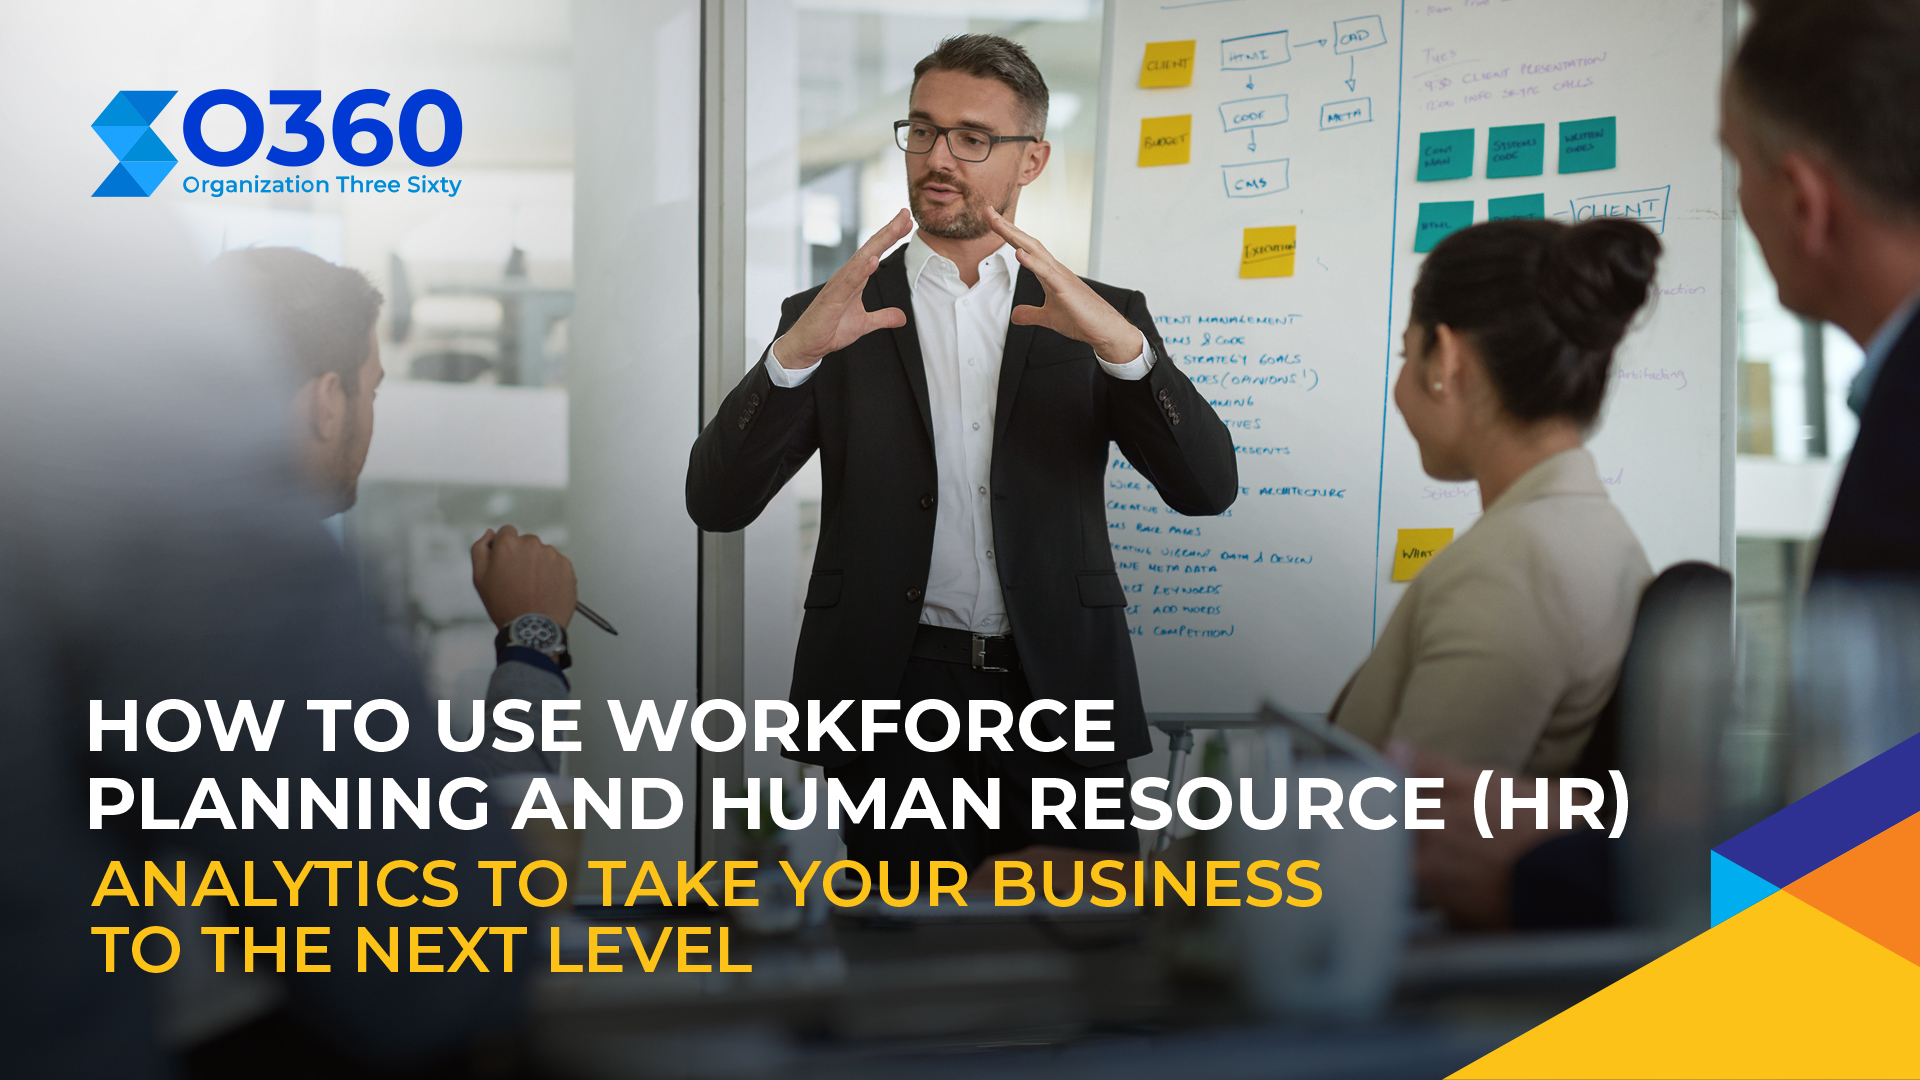 How to use Workforce Planning and HR Analytics to take your business to the next level?